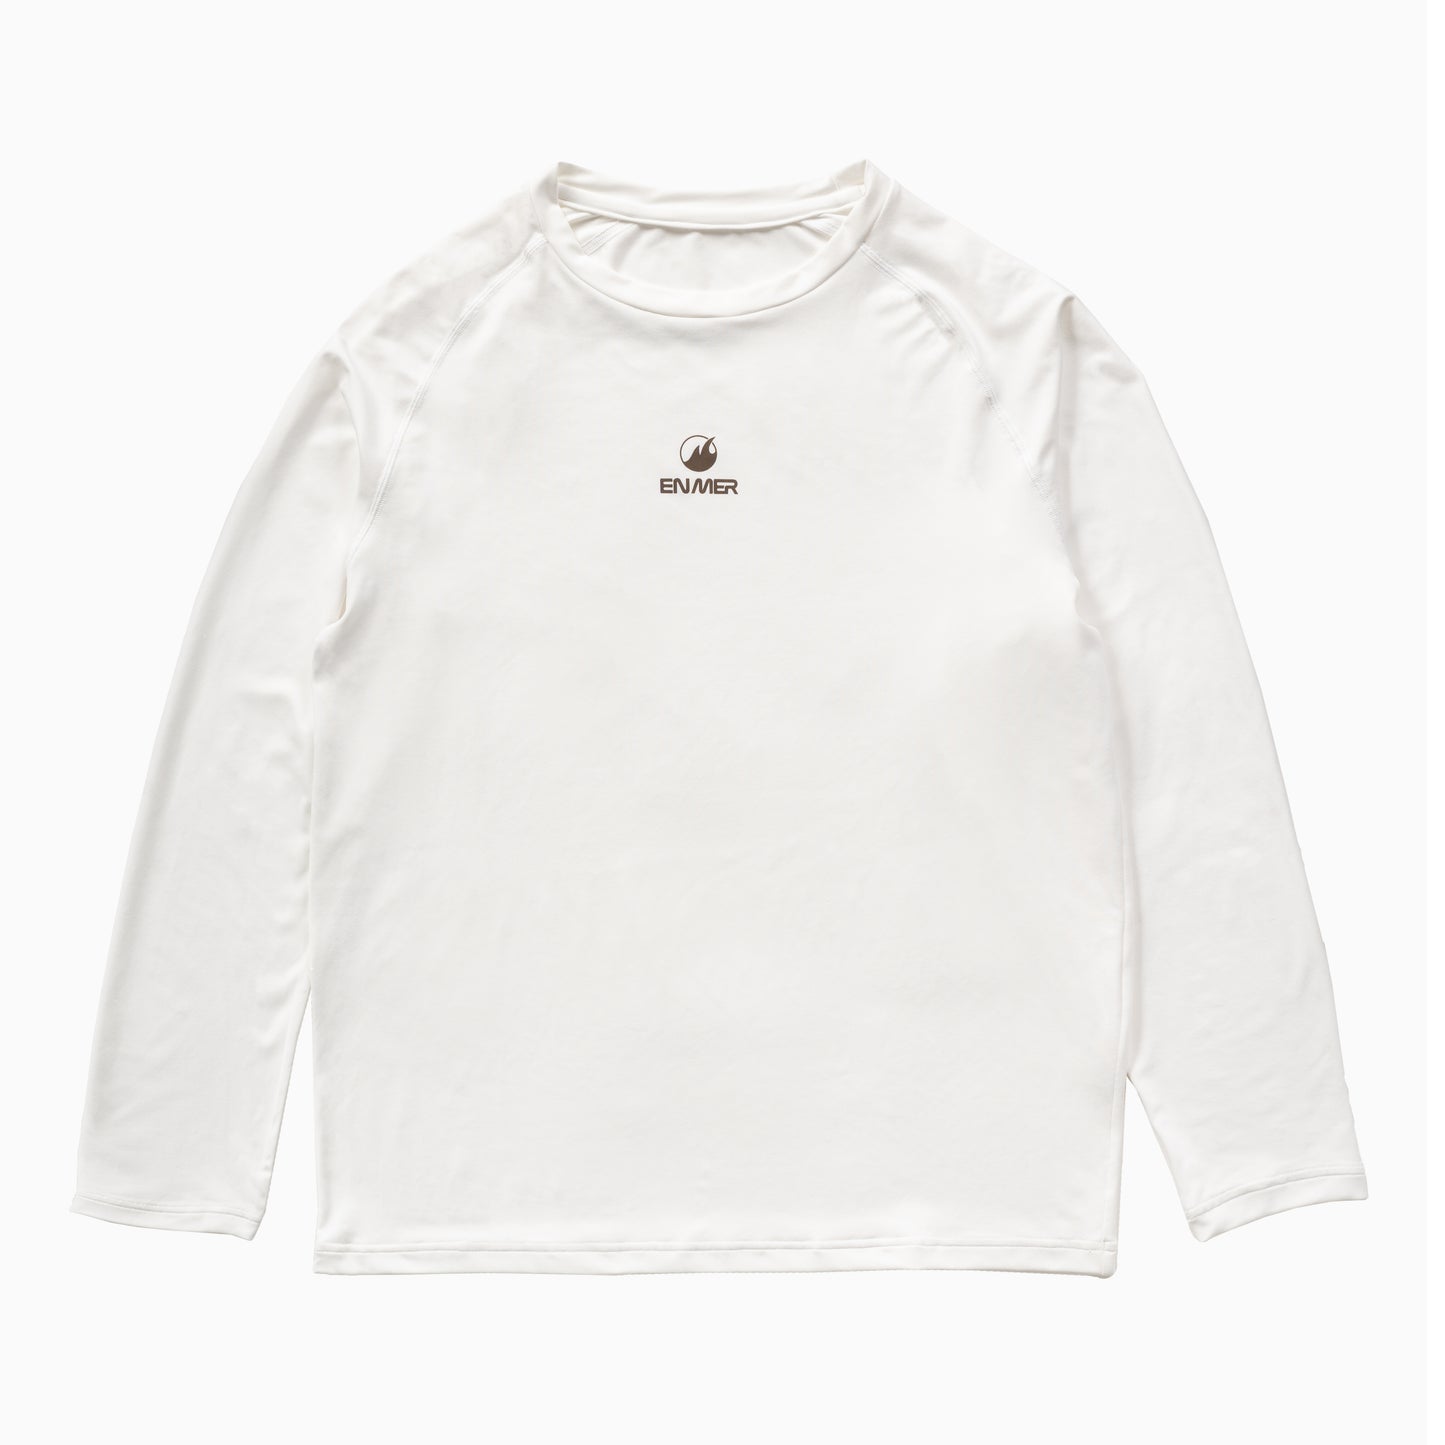 ENMER SPORTS LONG SLEEVE T-SHIRTS (WHITE)